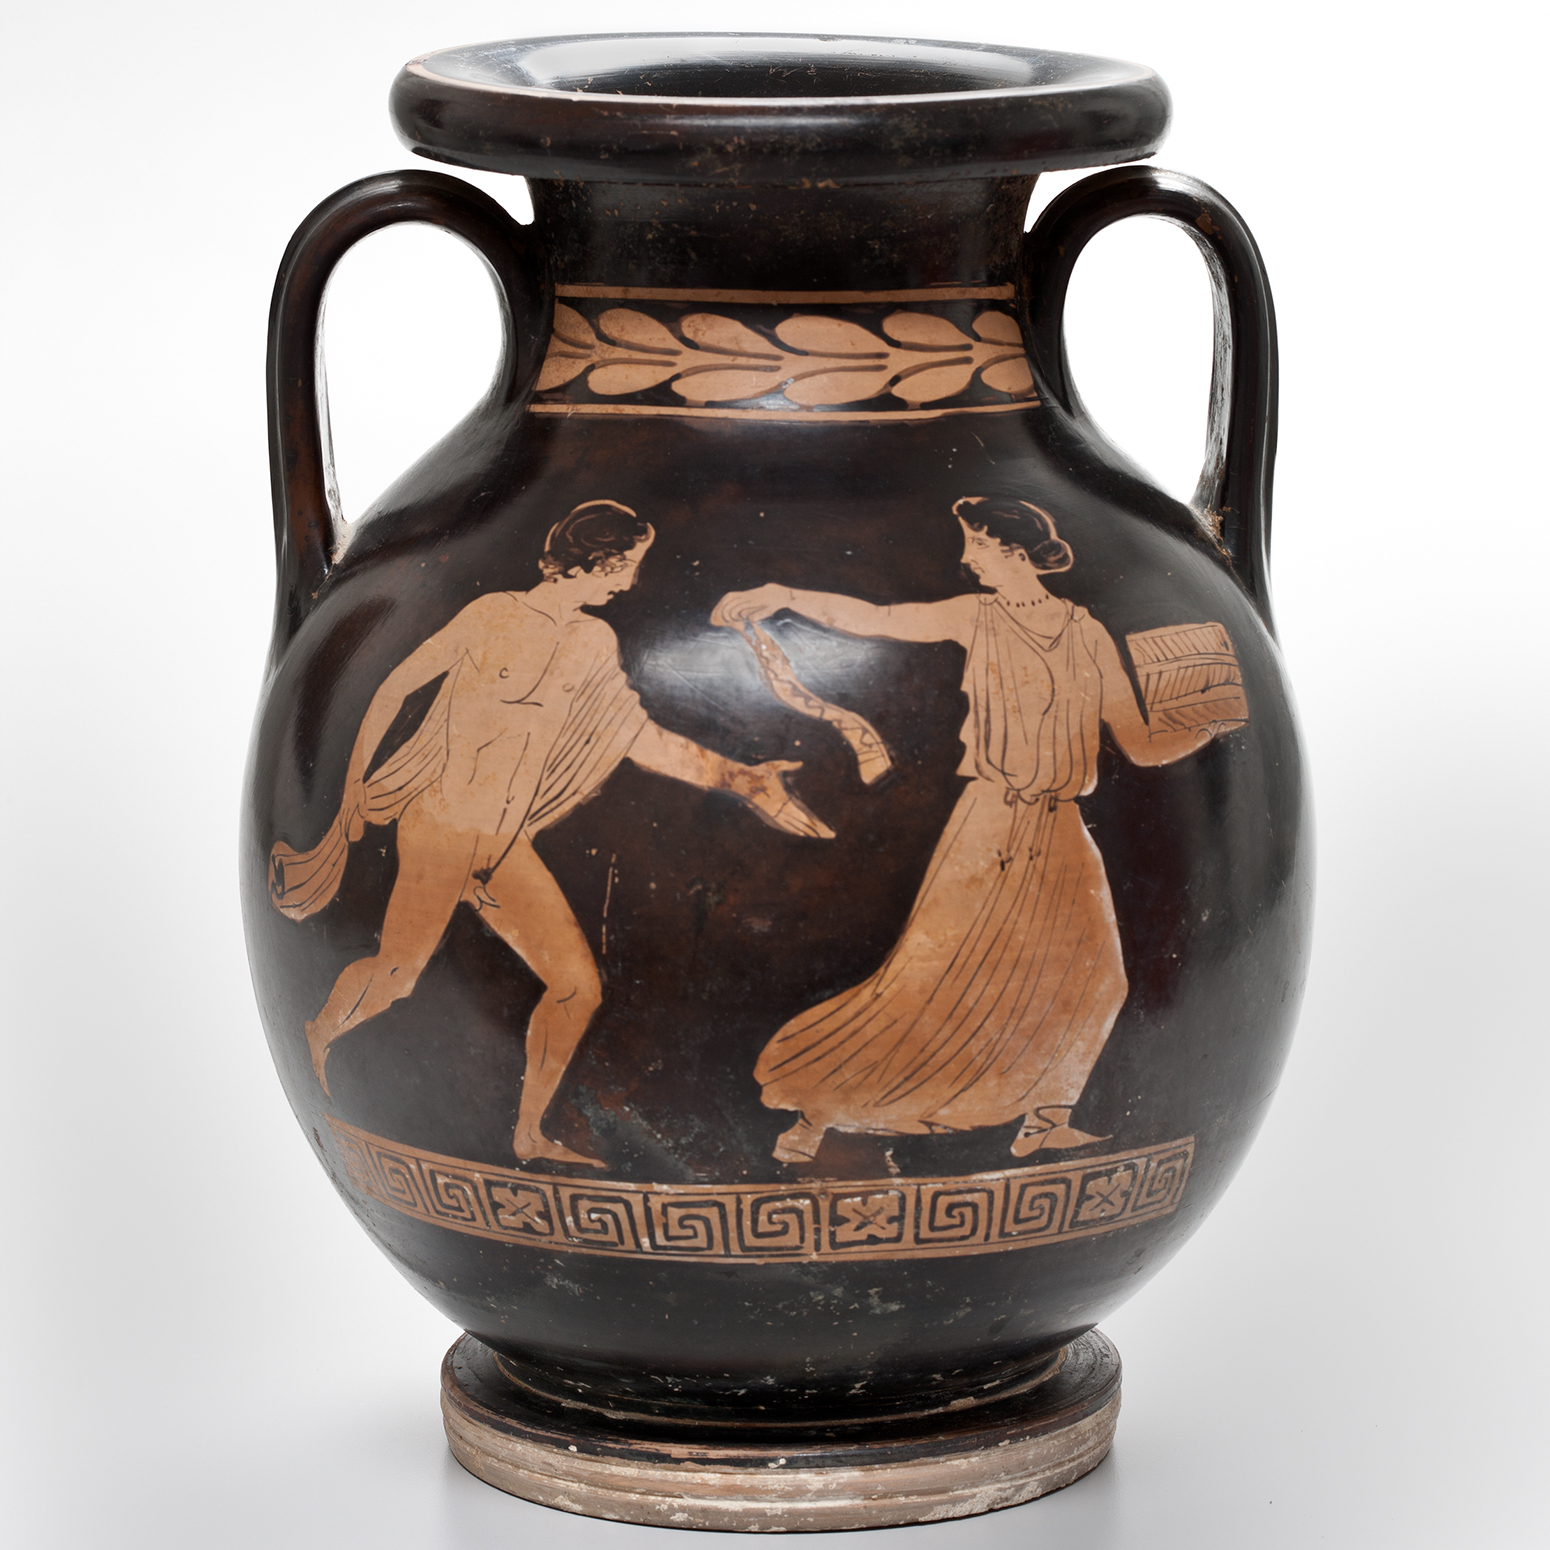 A black jug with two handles and a design of Roman figures and borders